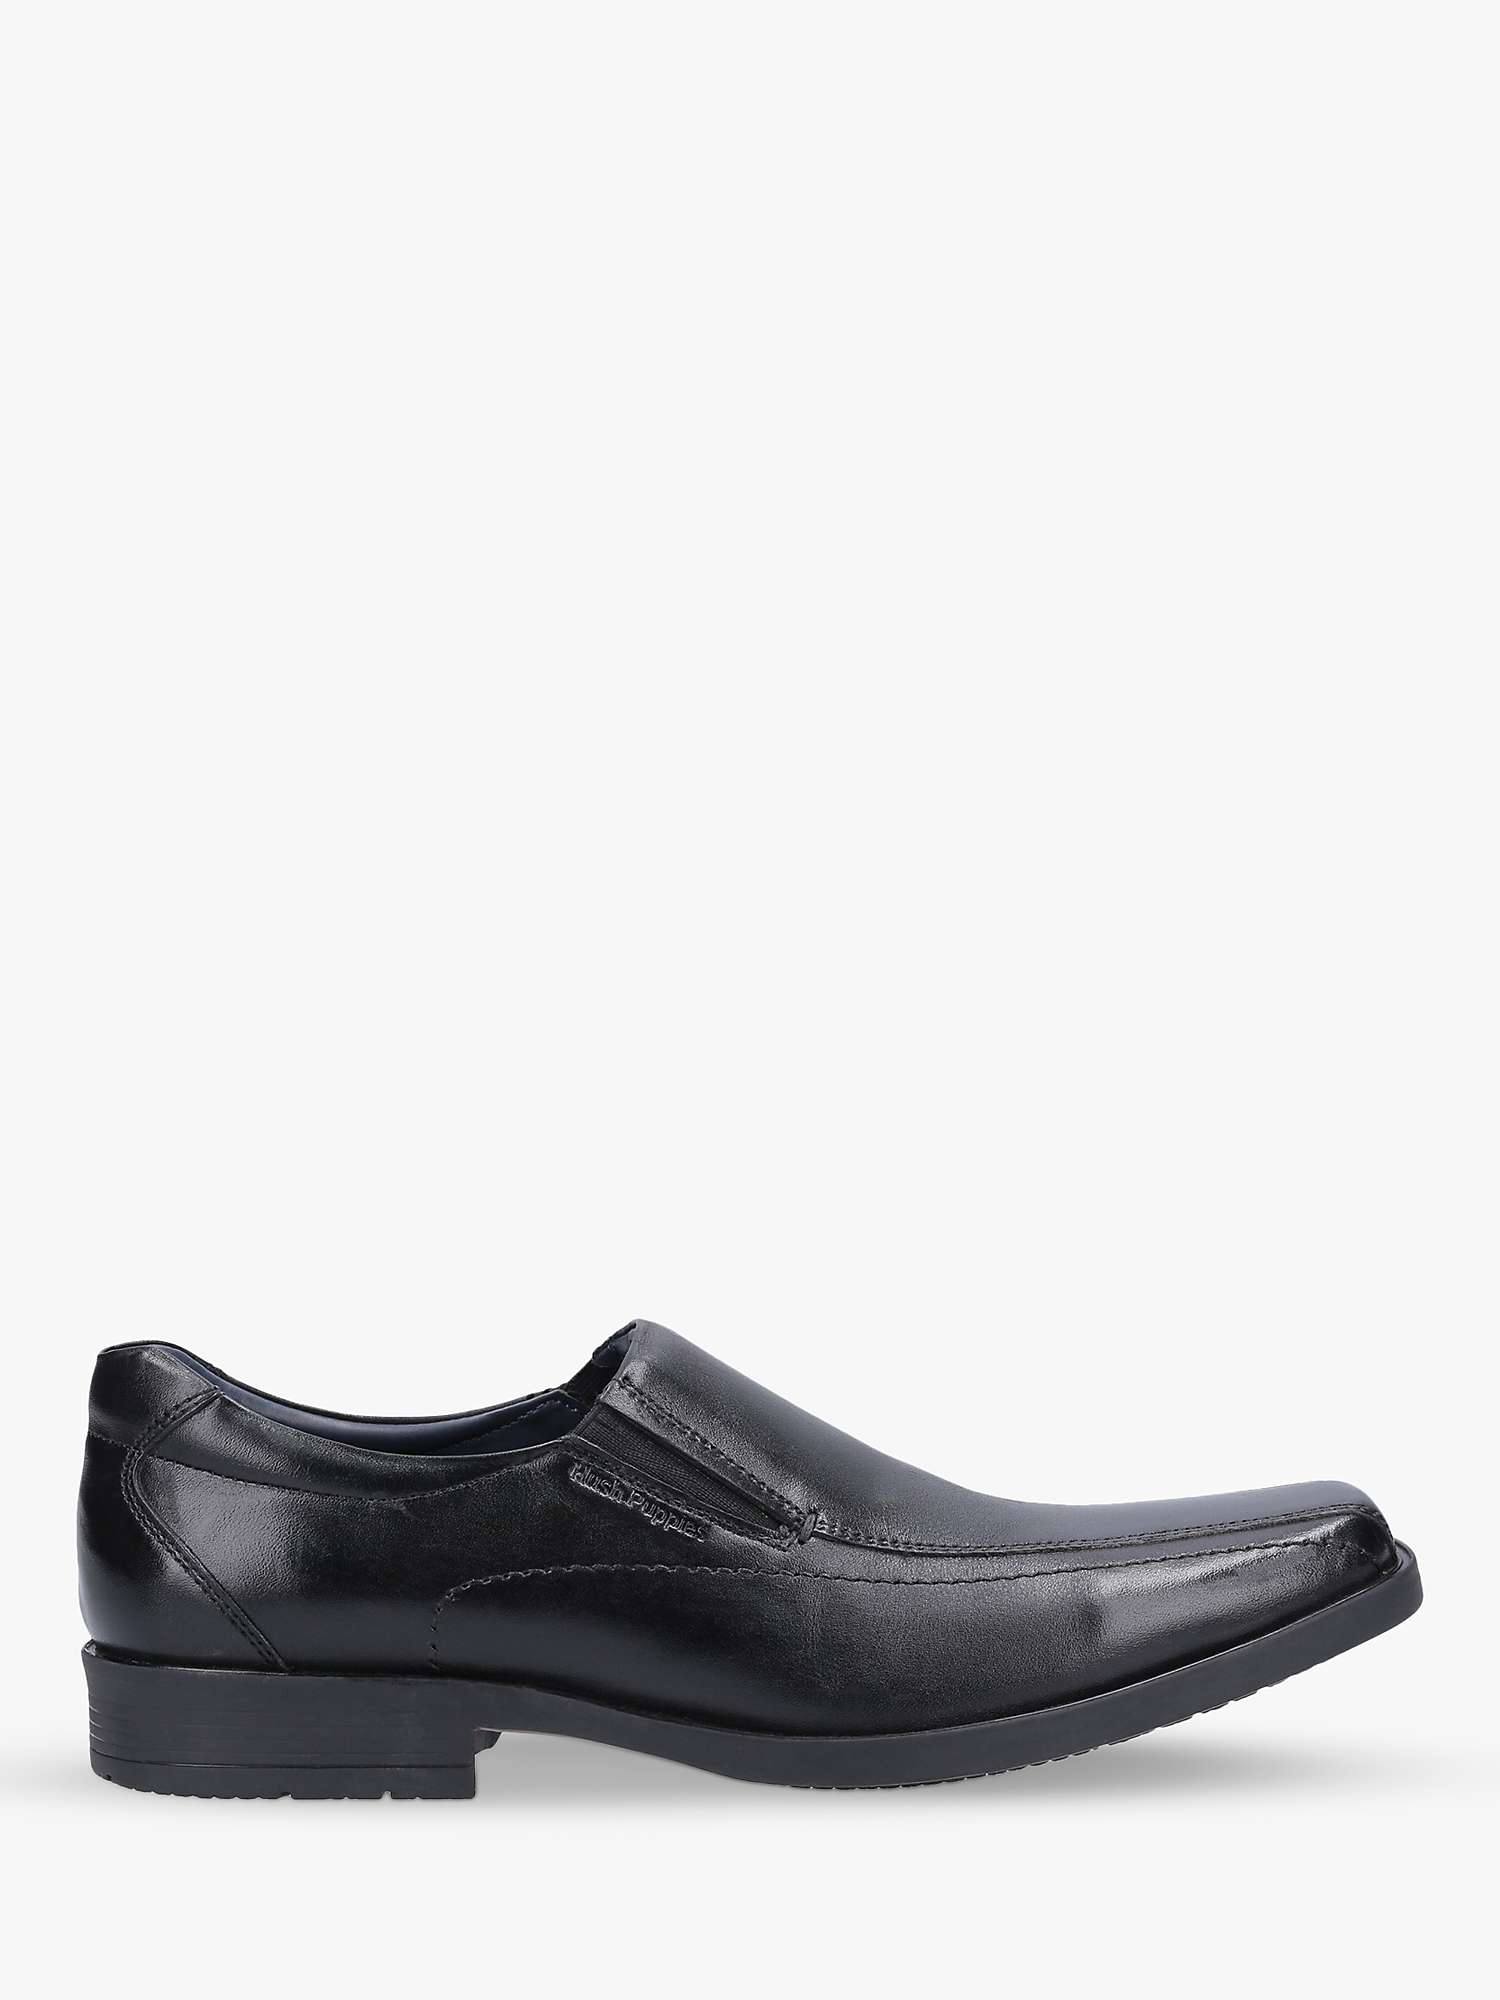 Buy Hush Puppies Brody Leather Slip On Shoes, Black Online at johnlewis.com